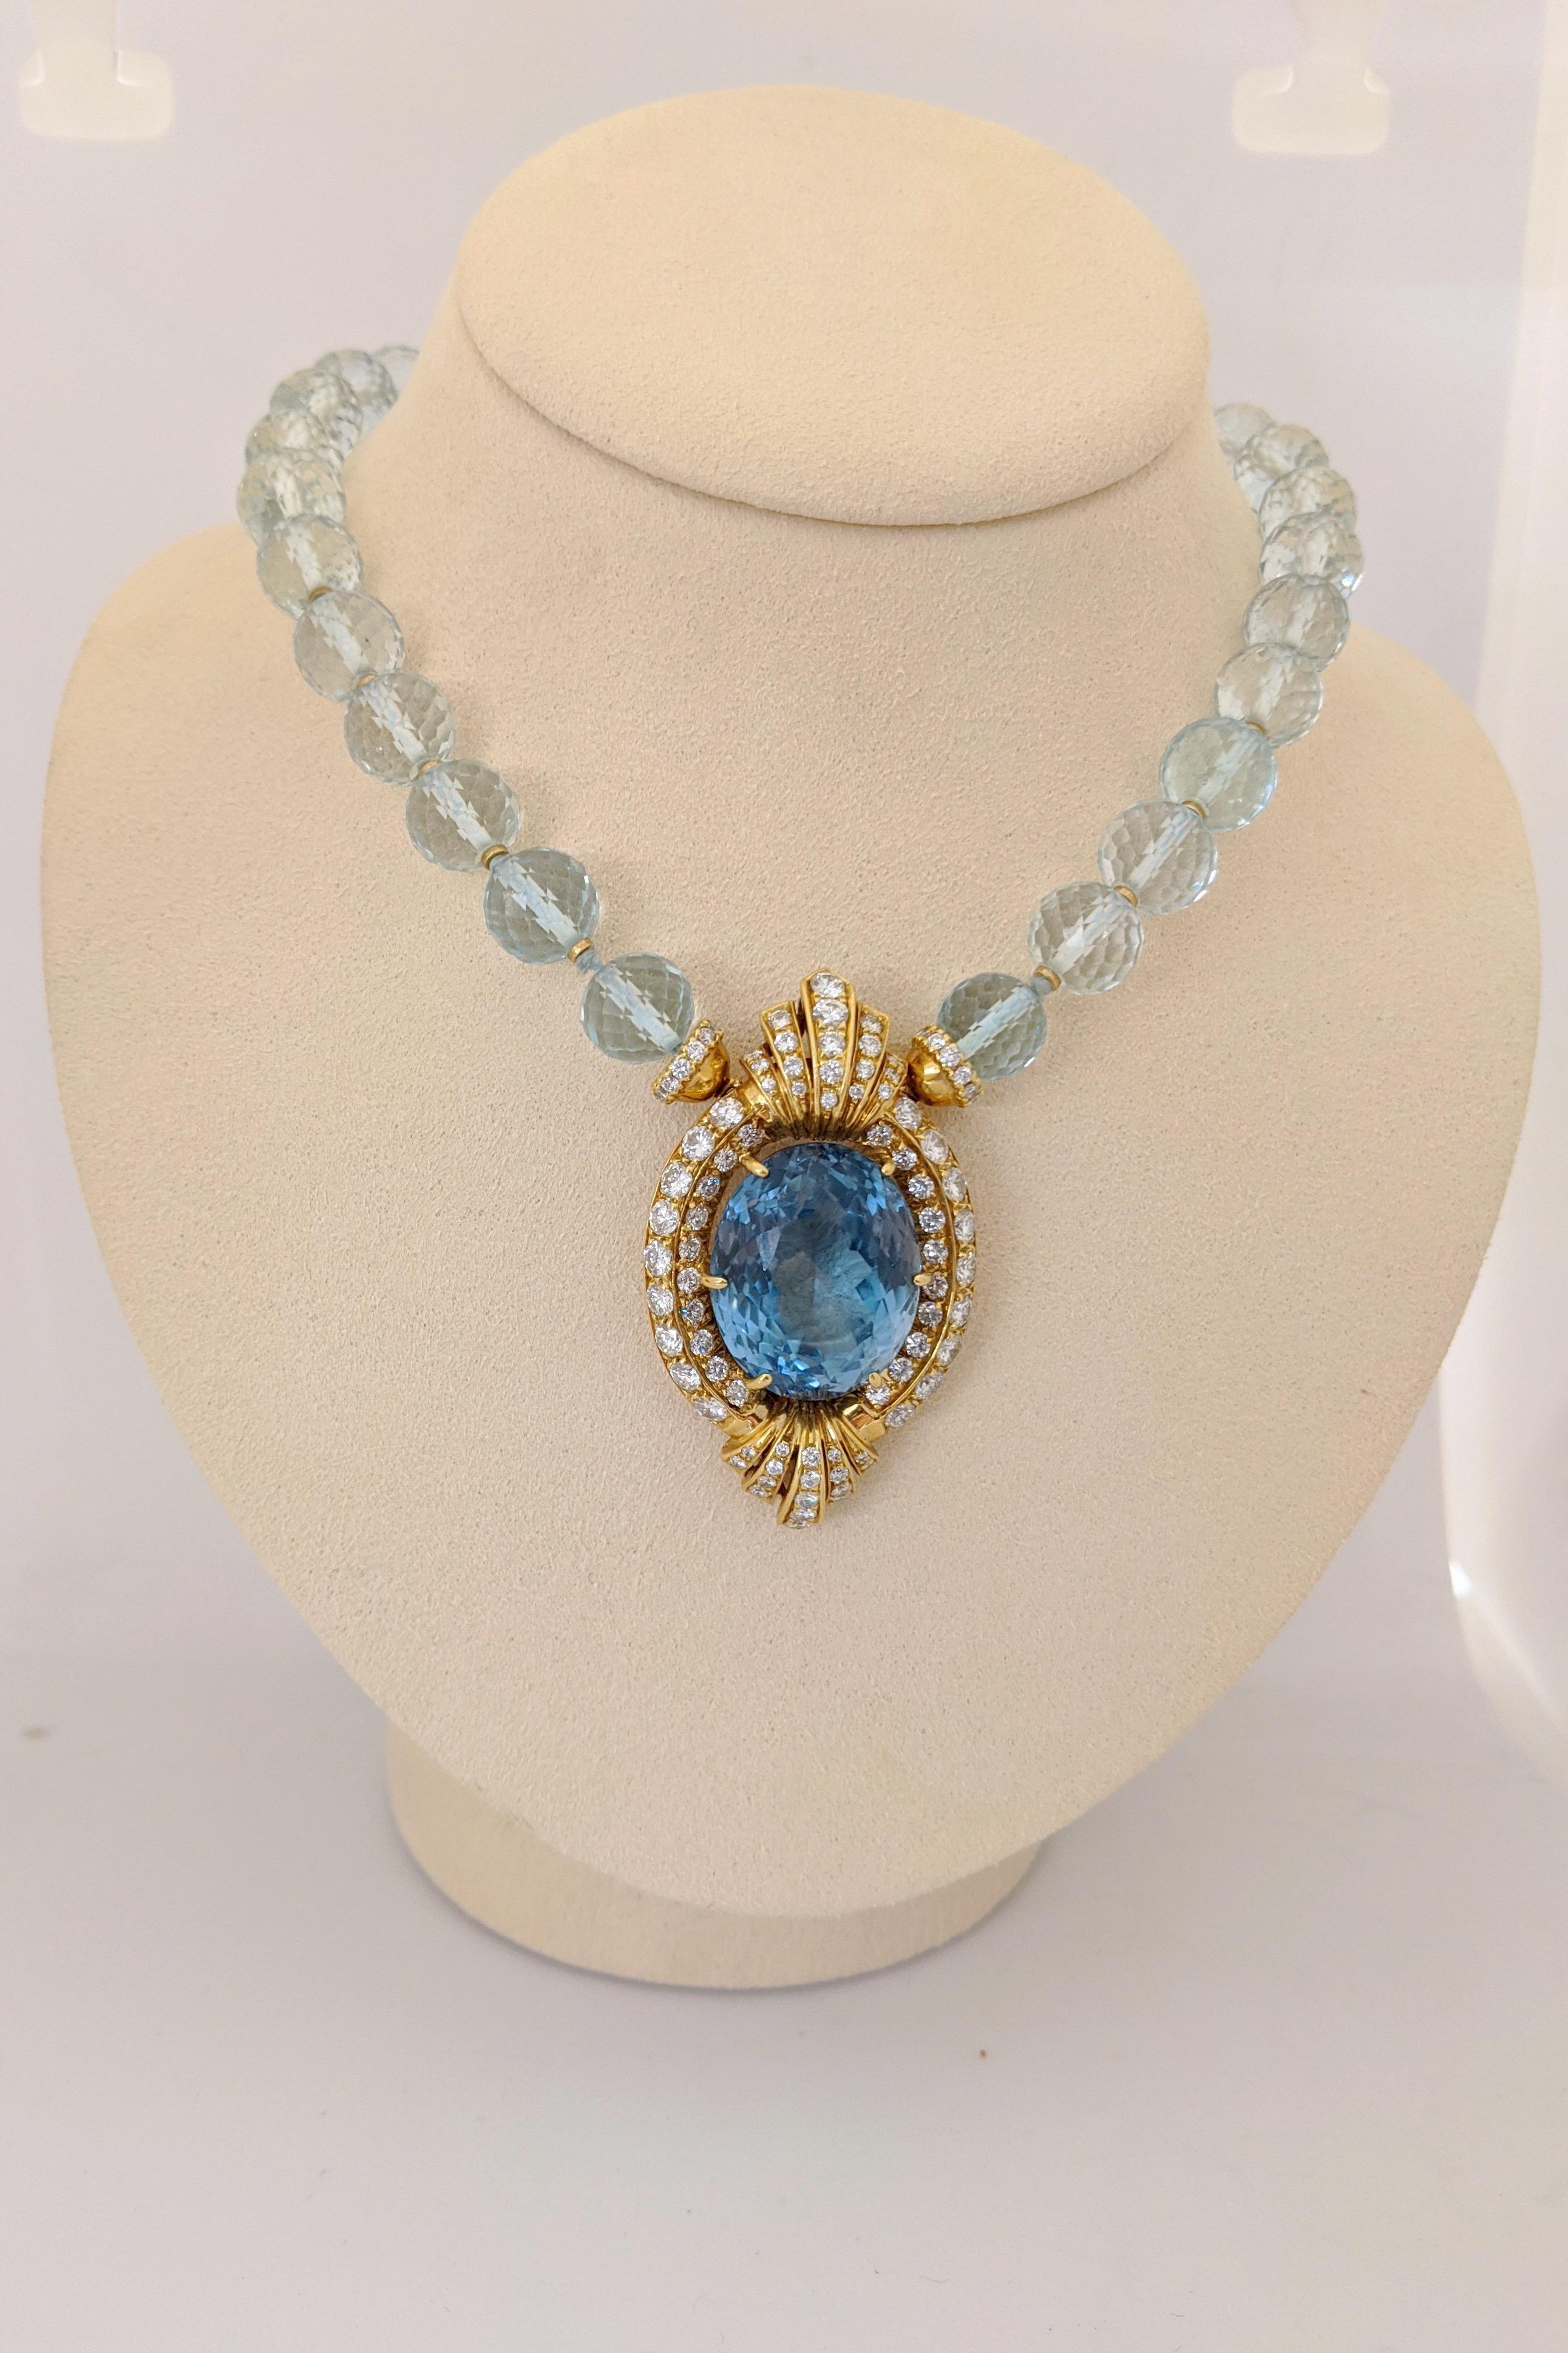 Oval Cut 18 Karat Gold Diamonds and 43.50 Carat Blue Topaz Necklace with Aquamarine Beads For Sale